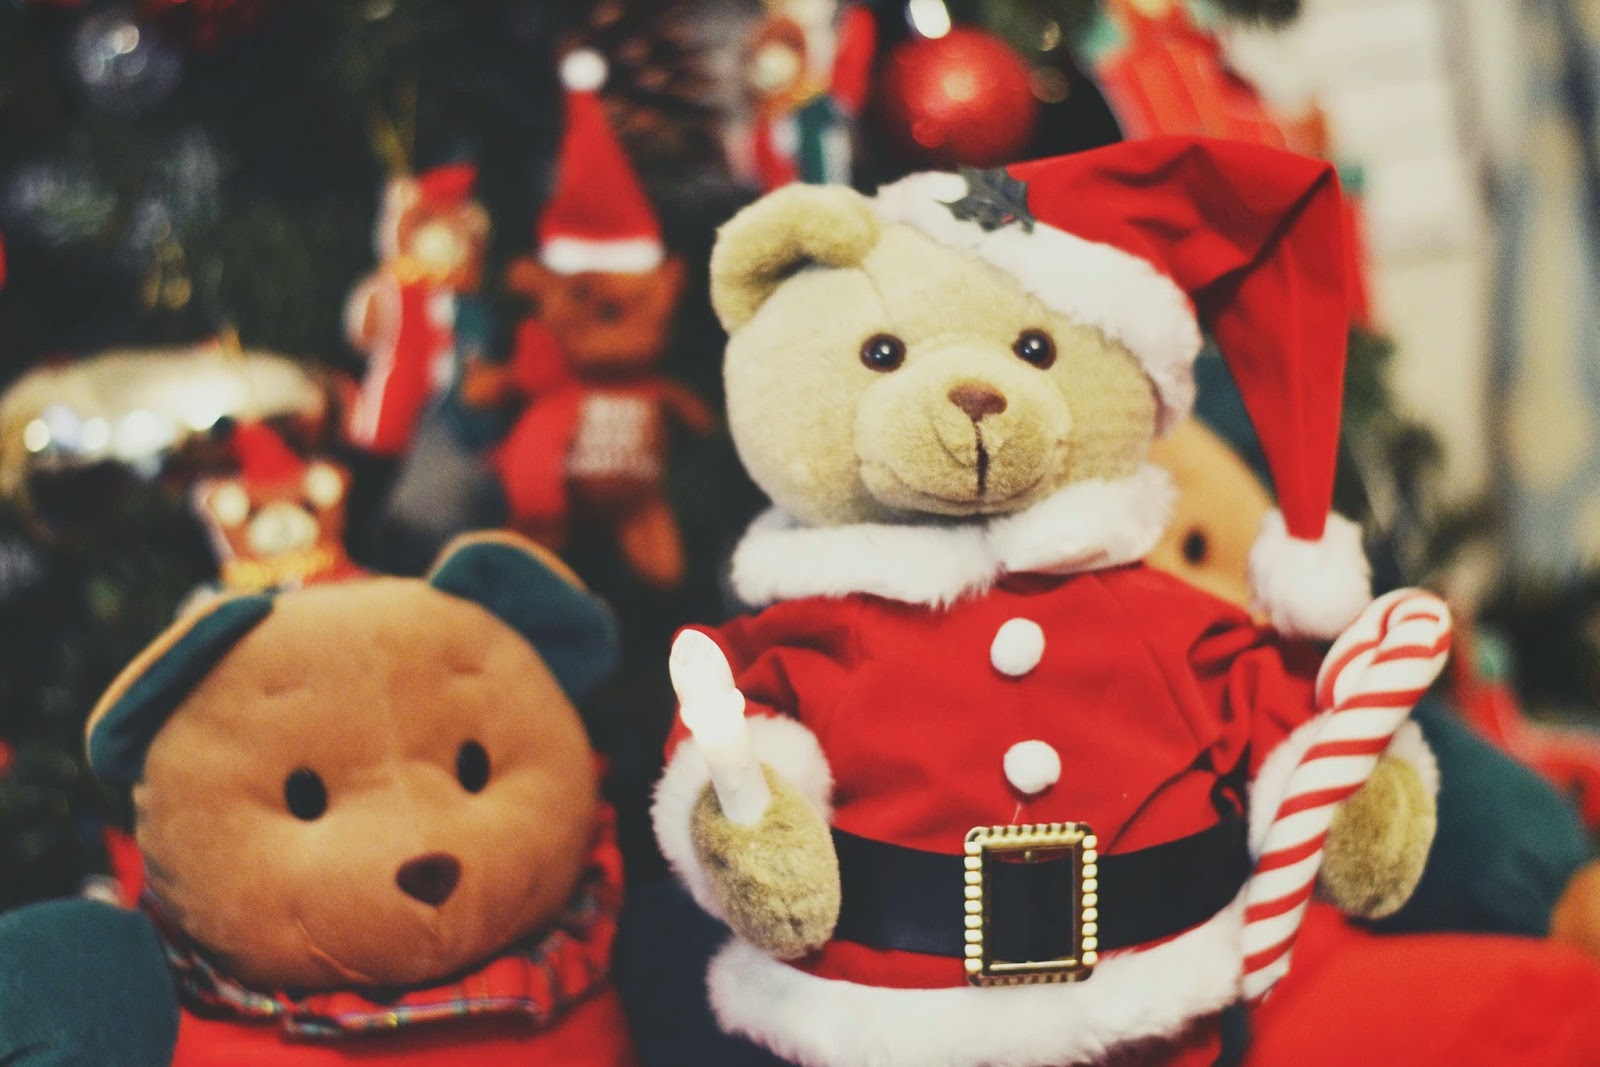 Do Tell, Anabel: Memories of a 'Beary' Merry Christmas with a Toddler...